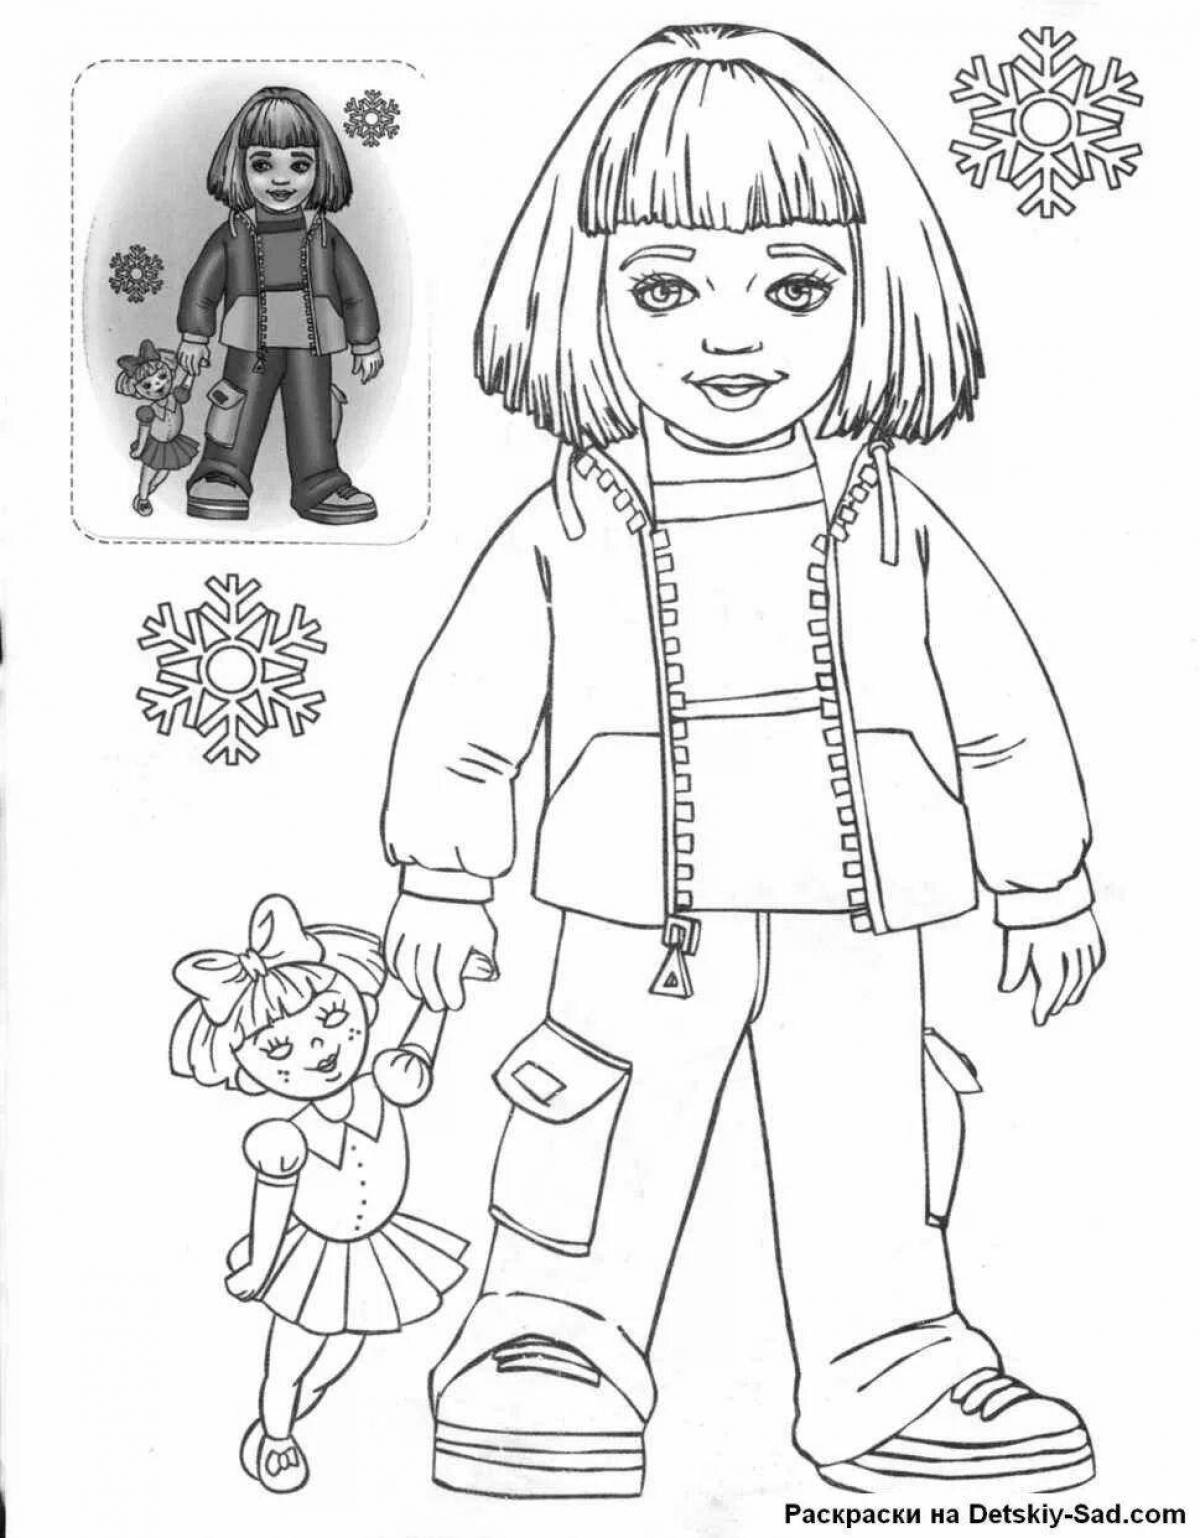 Glamour-coloring doll in winter clothes